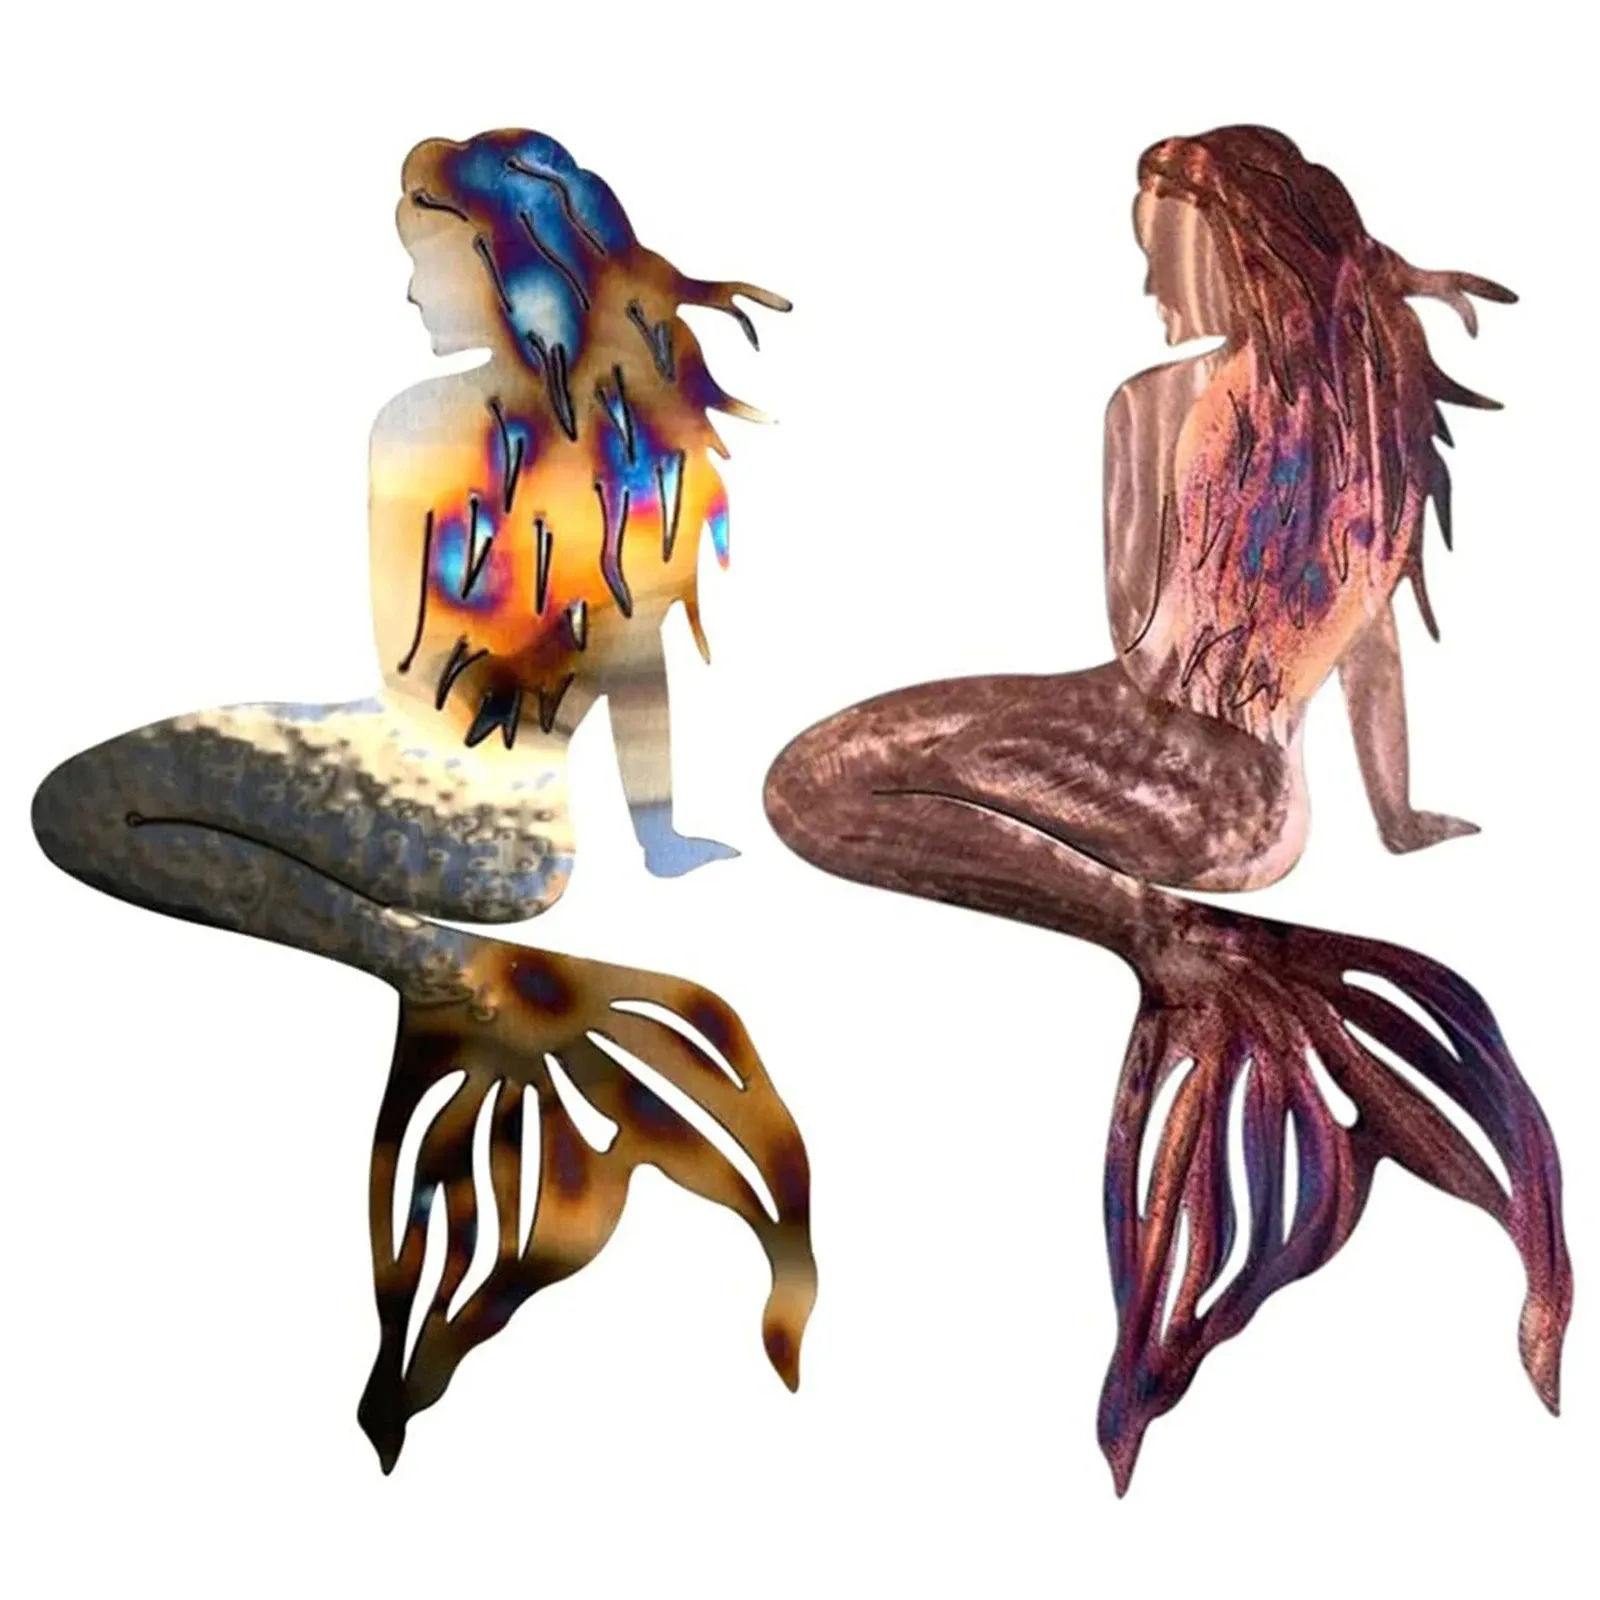 Sculptures Metal Wrought Iron Mermaids Crafts Mermaids Metal Fish Tail Wall Art For Home Garden Beach Home Decoration Ornaments